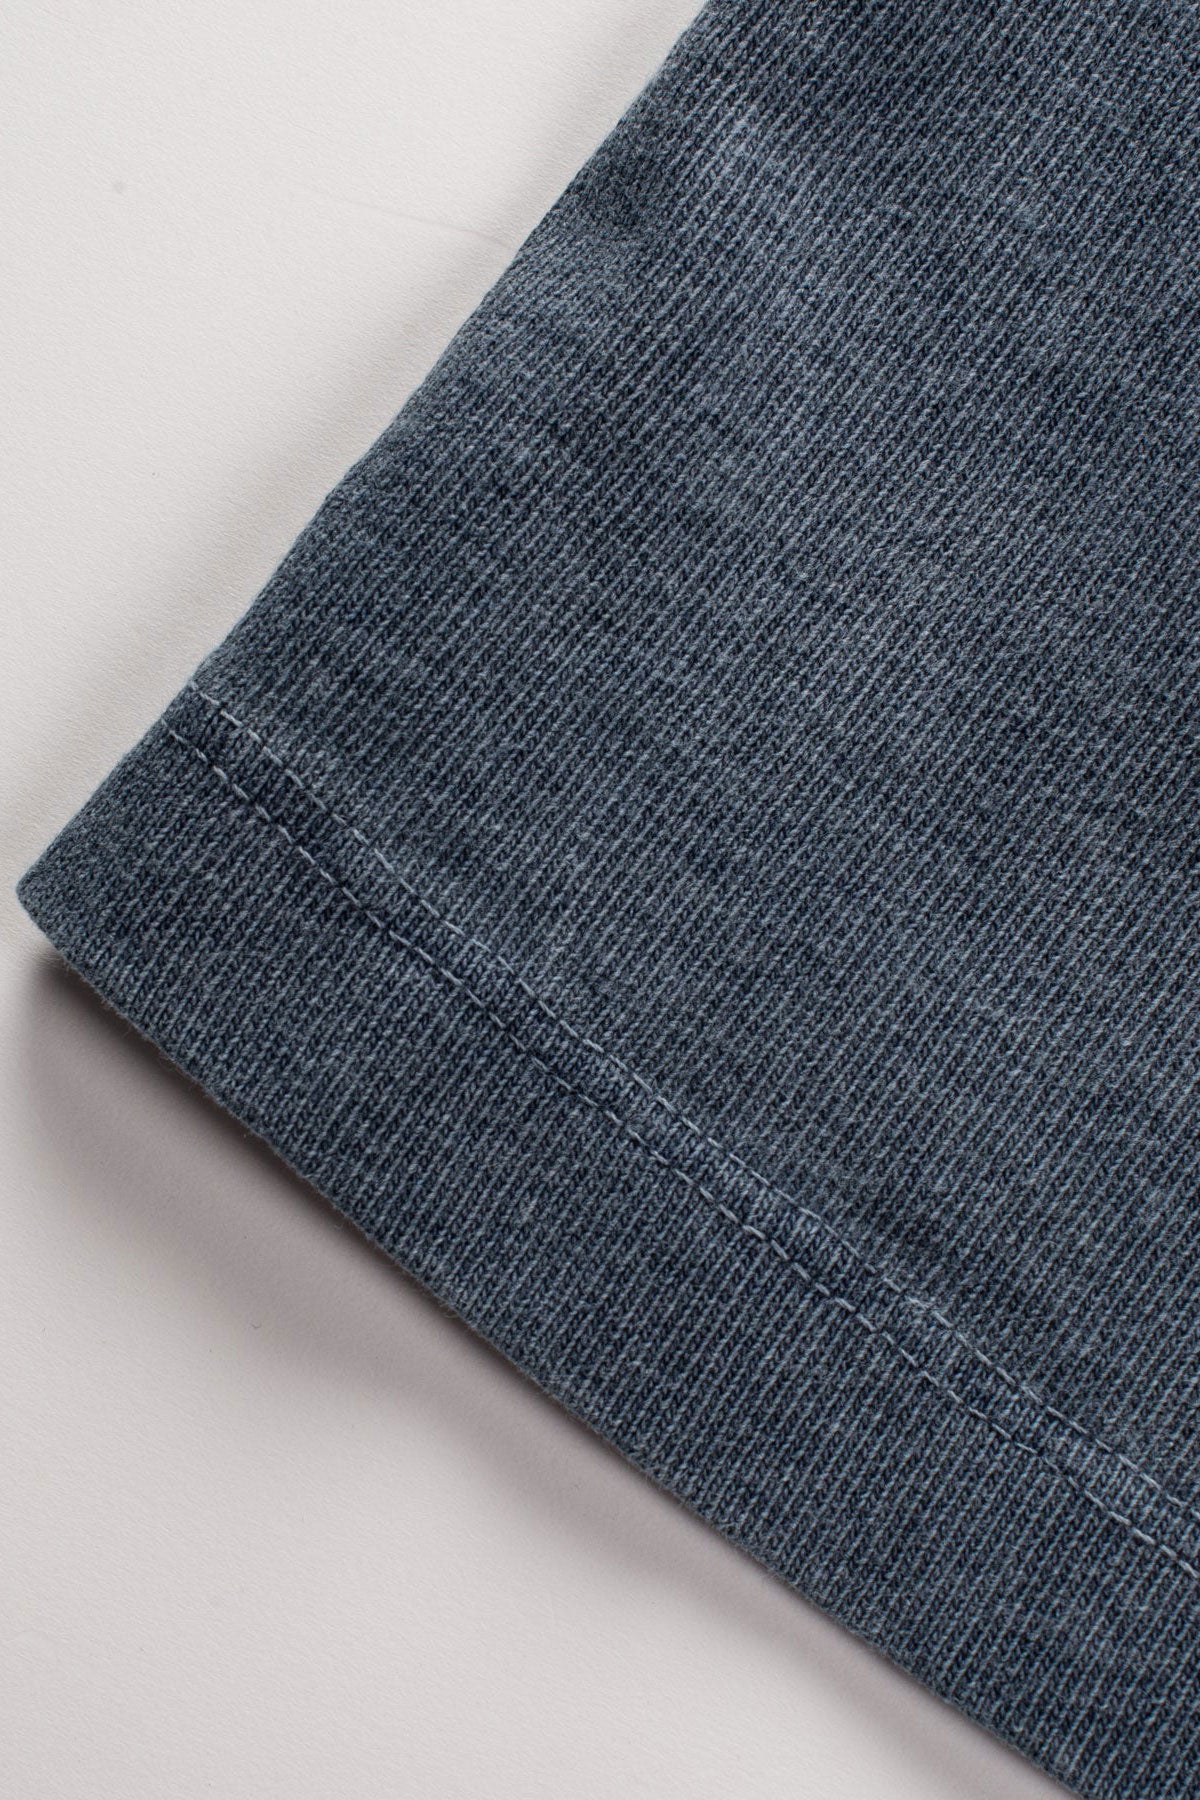 Freenote Cloth - 13 Ounce Henley - L/S Faded Blue